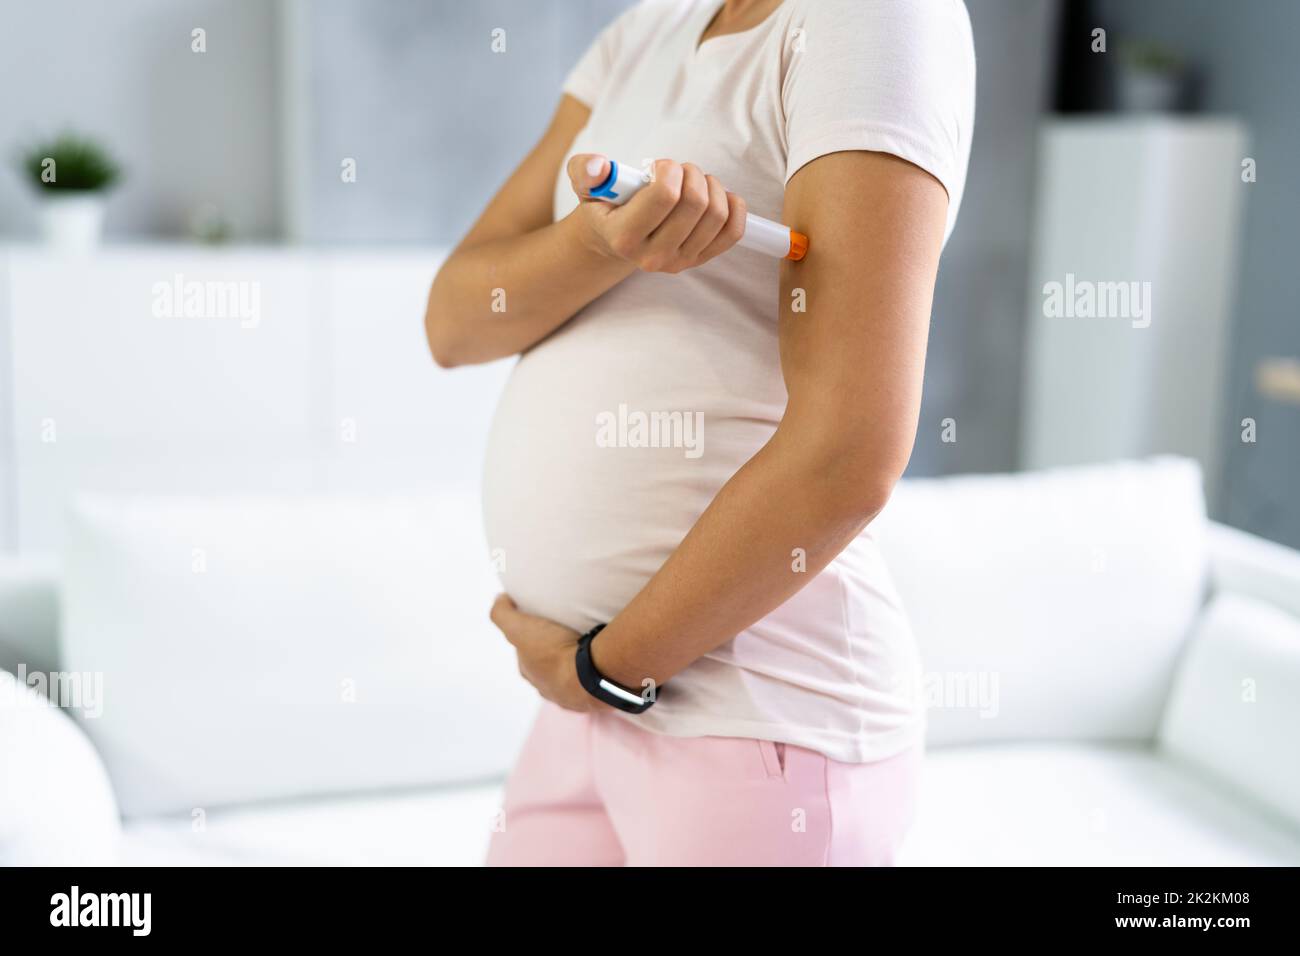 Pregnant Woman With Diabetes. Medical Health Concept Stock Photo